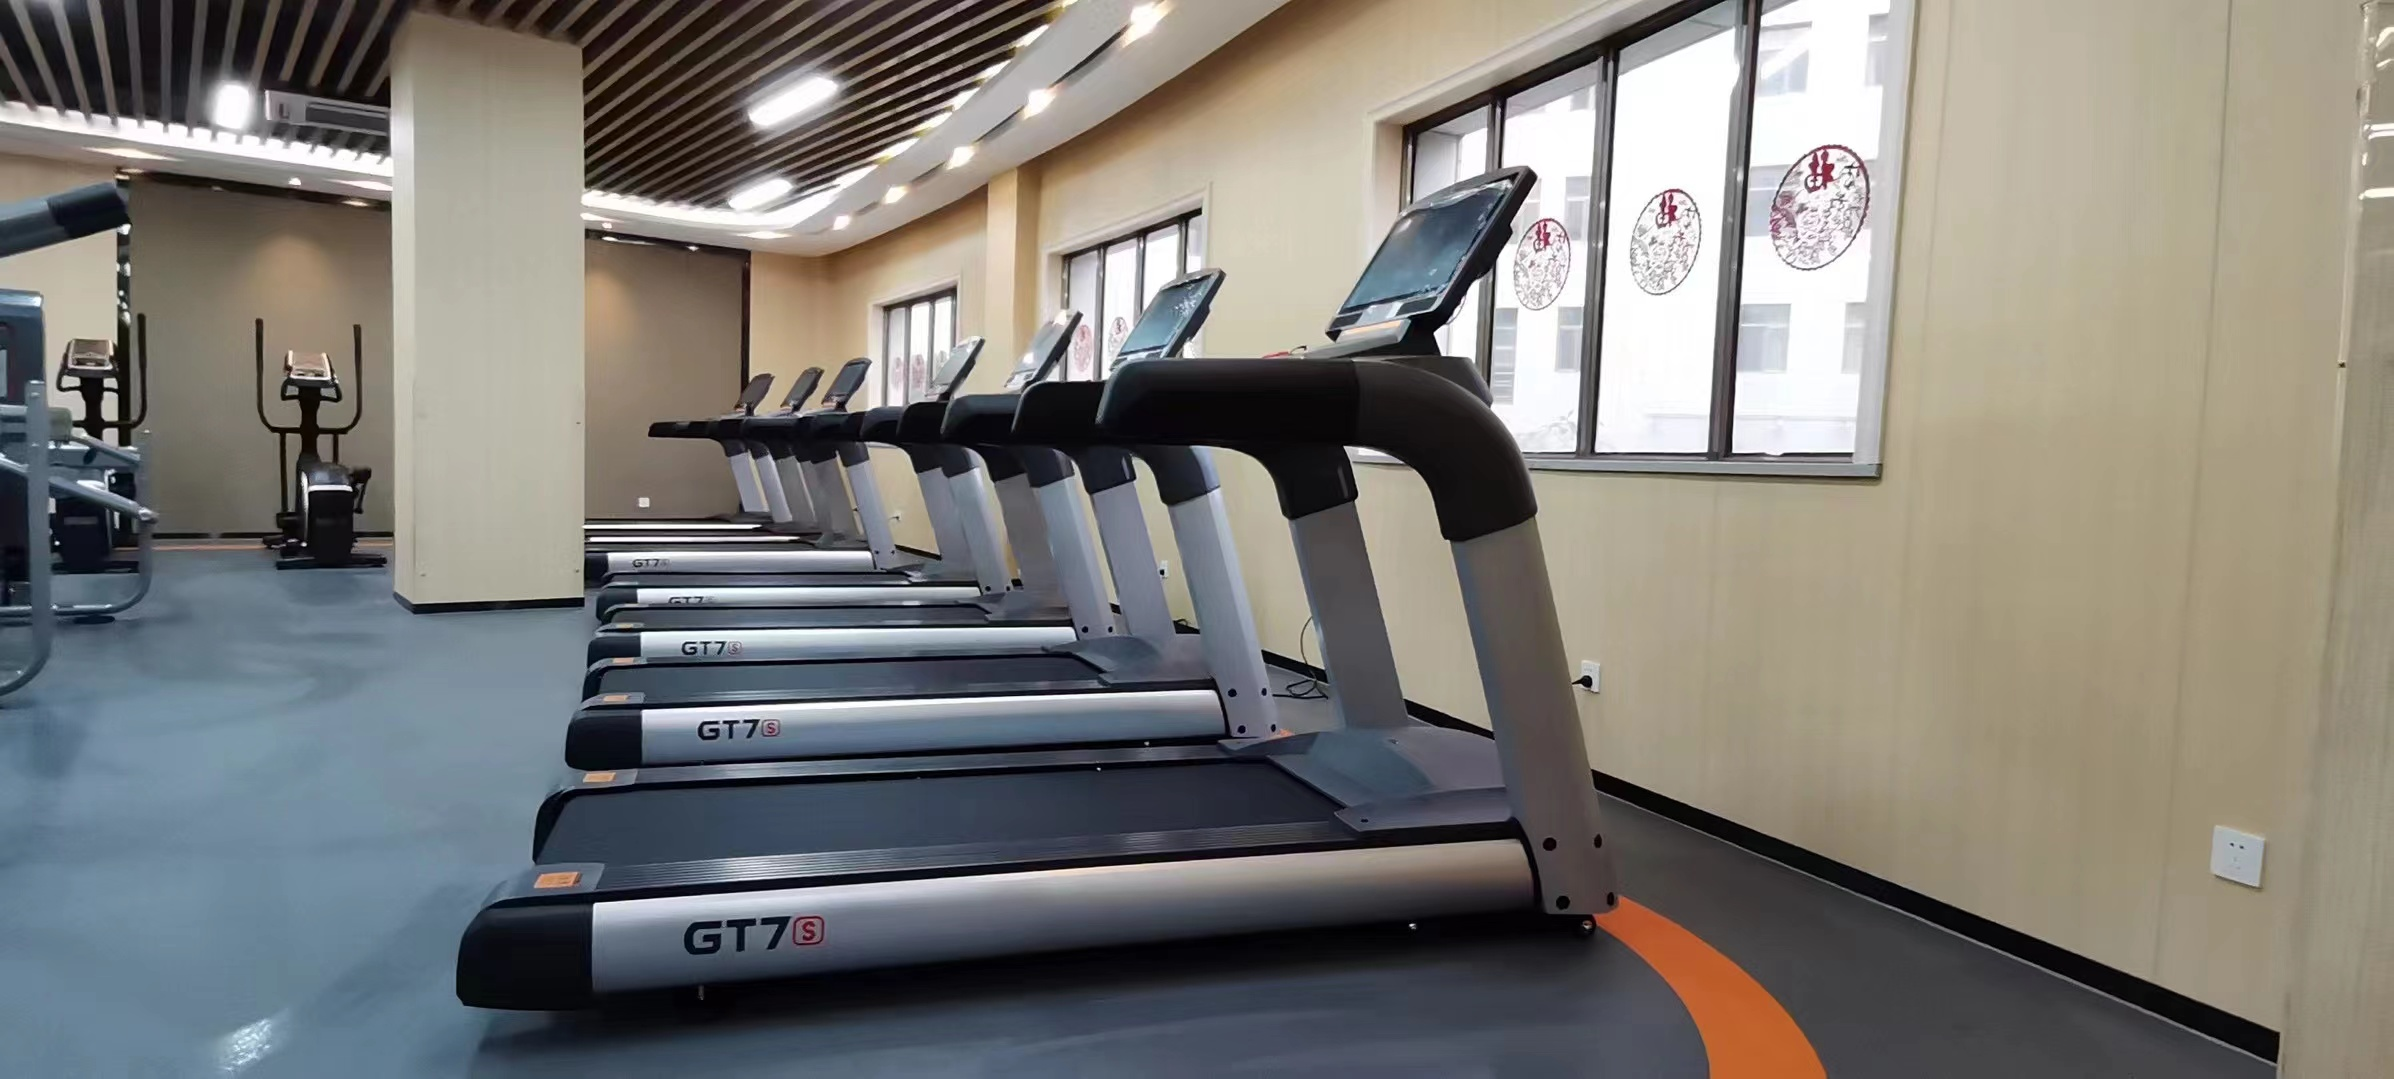 wholesale custom fitness gym equipment suppliers manufacturers